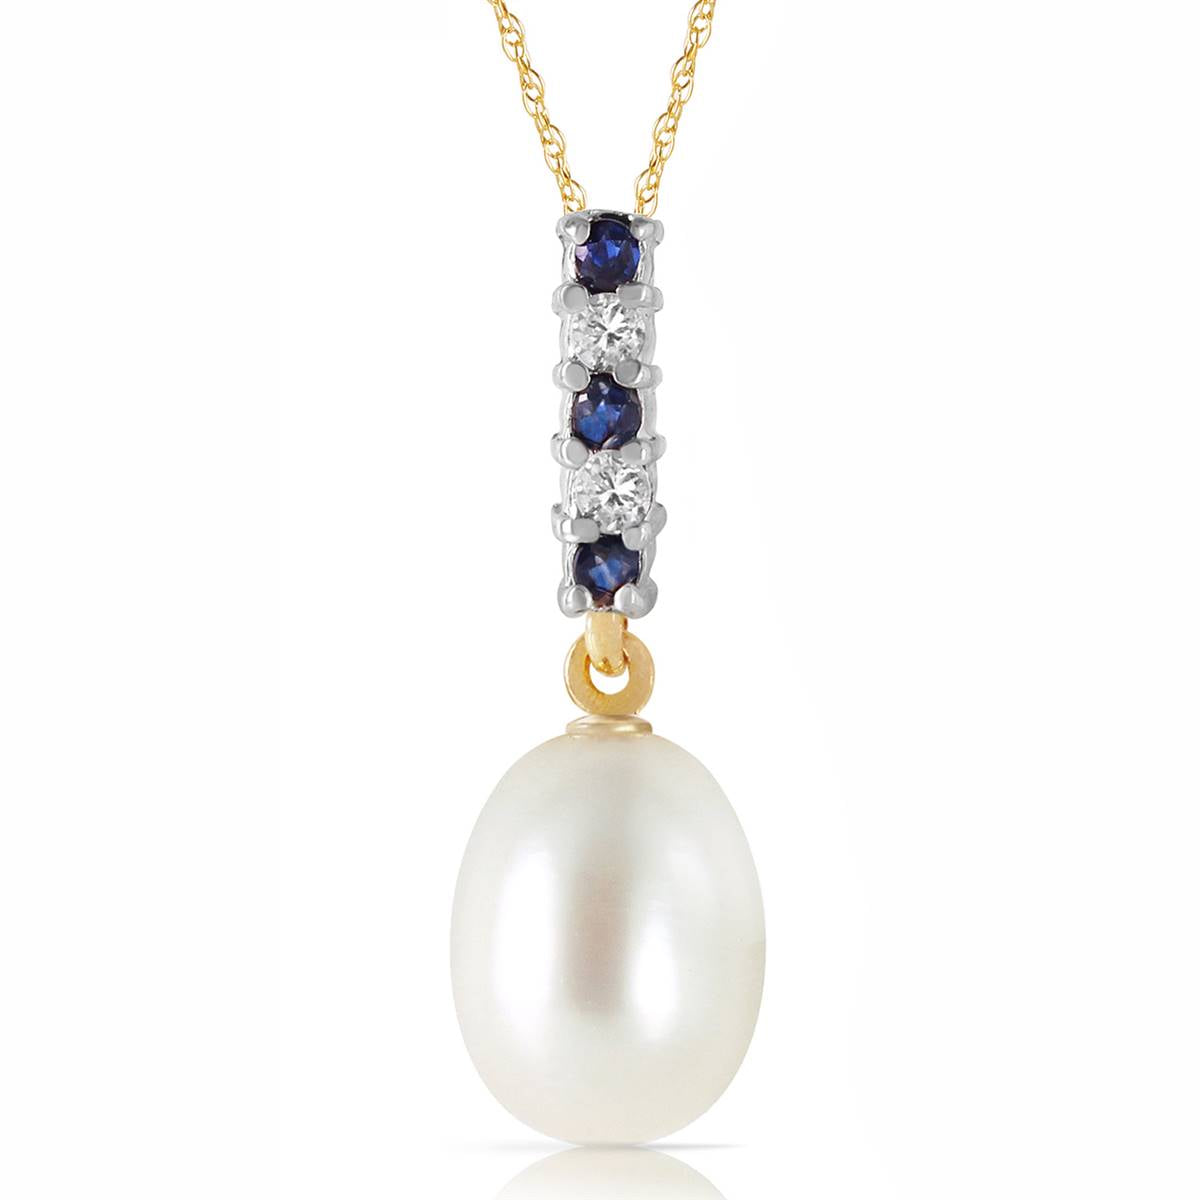 4.15 Carat 14K Solid Yellow Gold Necklace Diamond, Sapphire Briolette Pear